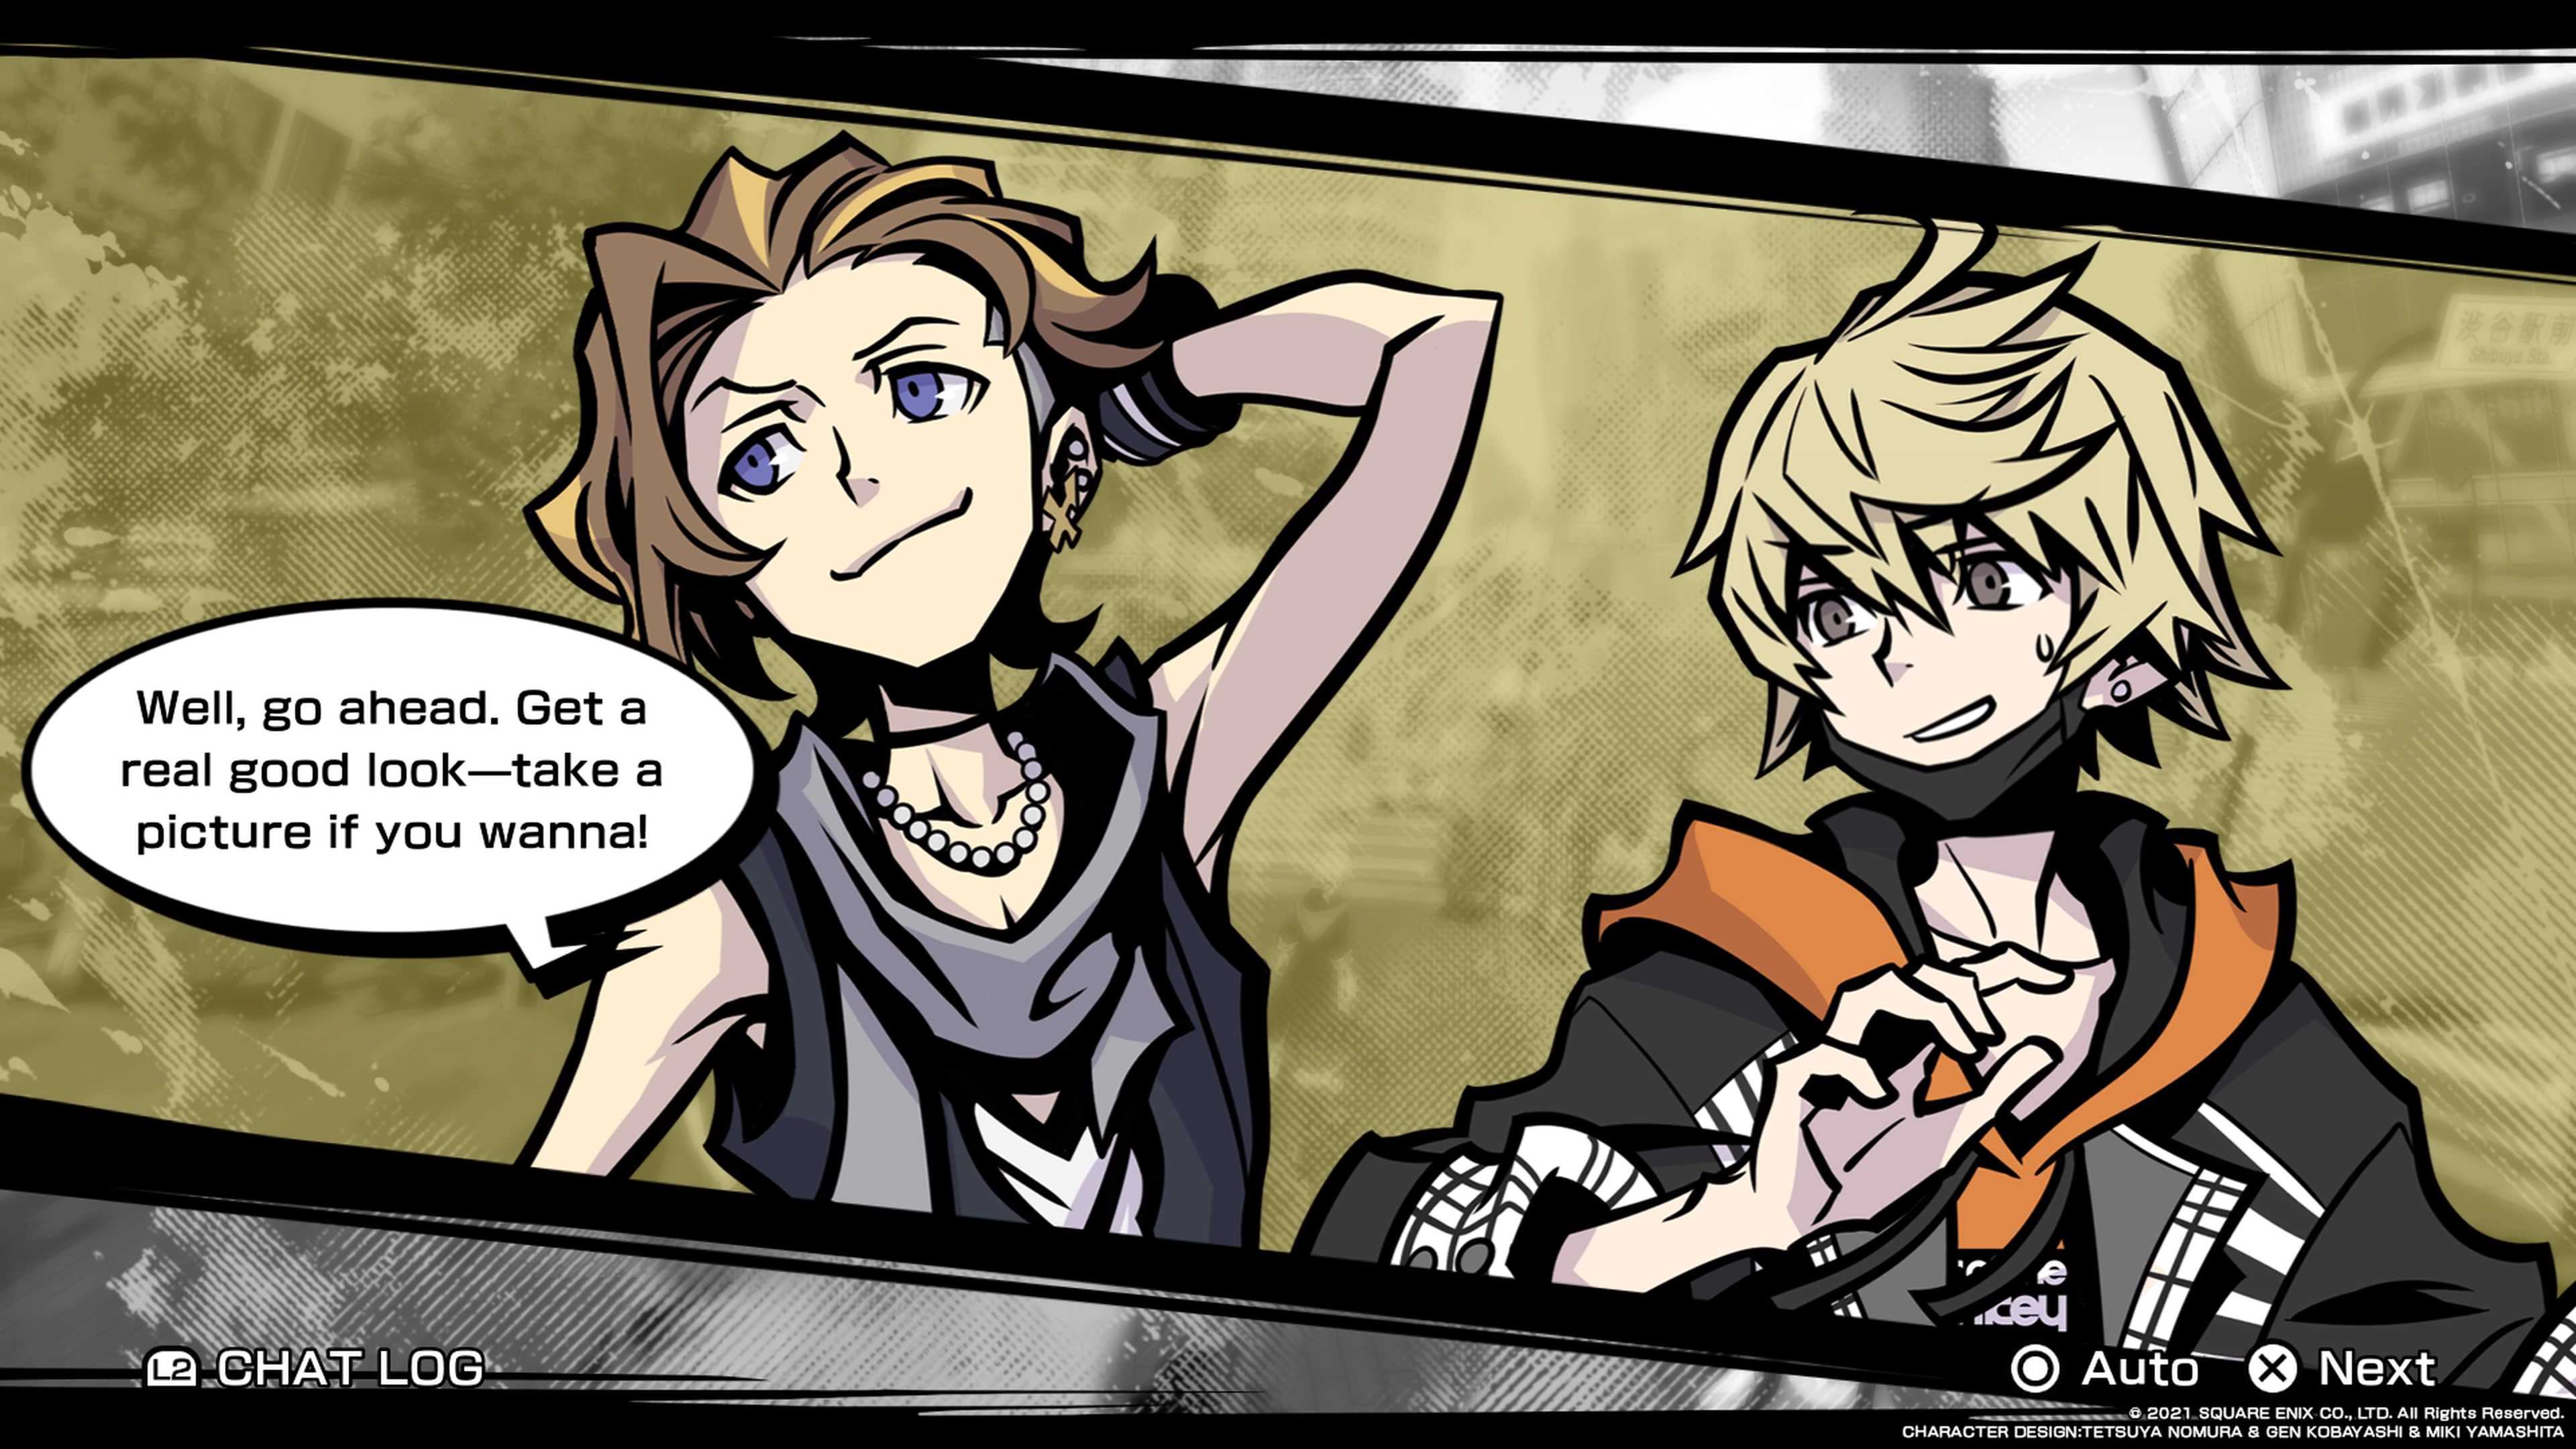 Neo The World Ends With You PS4 Review #71